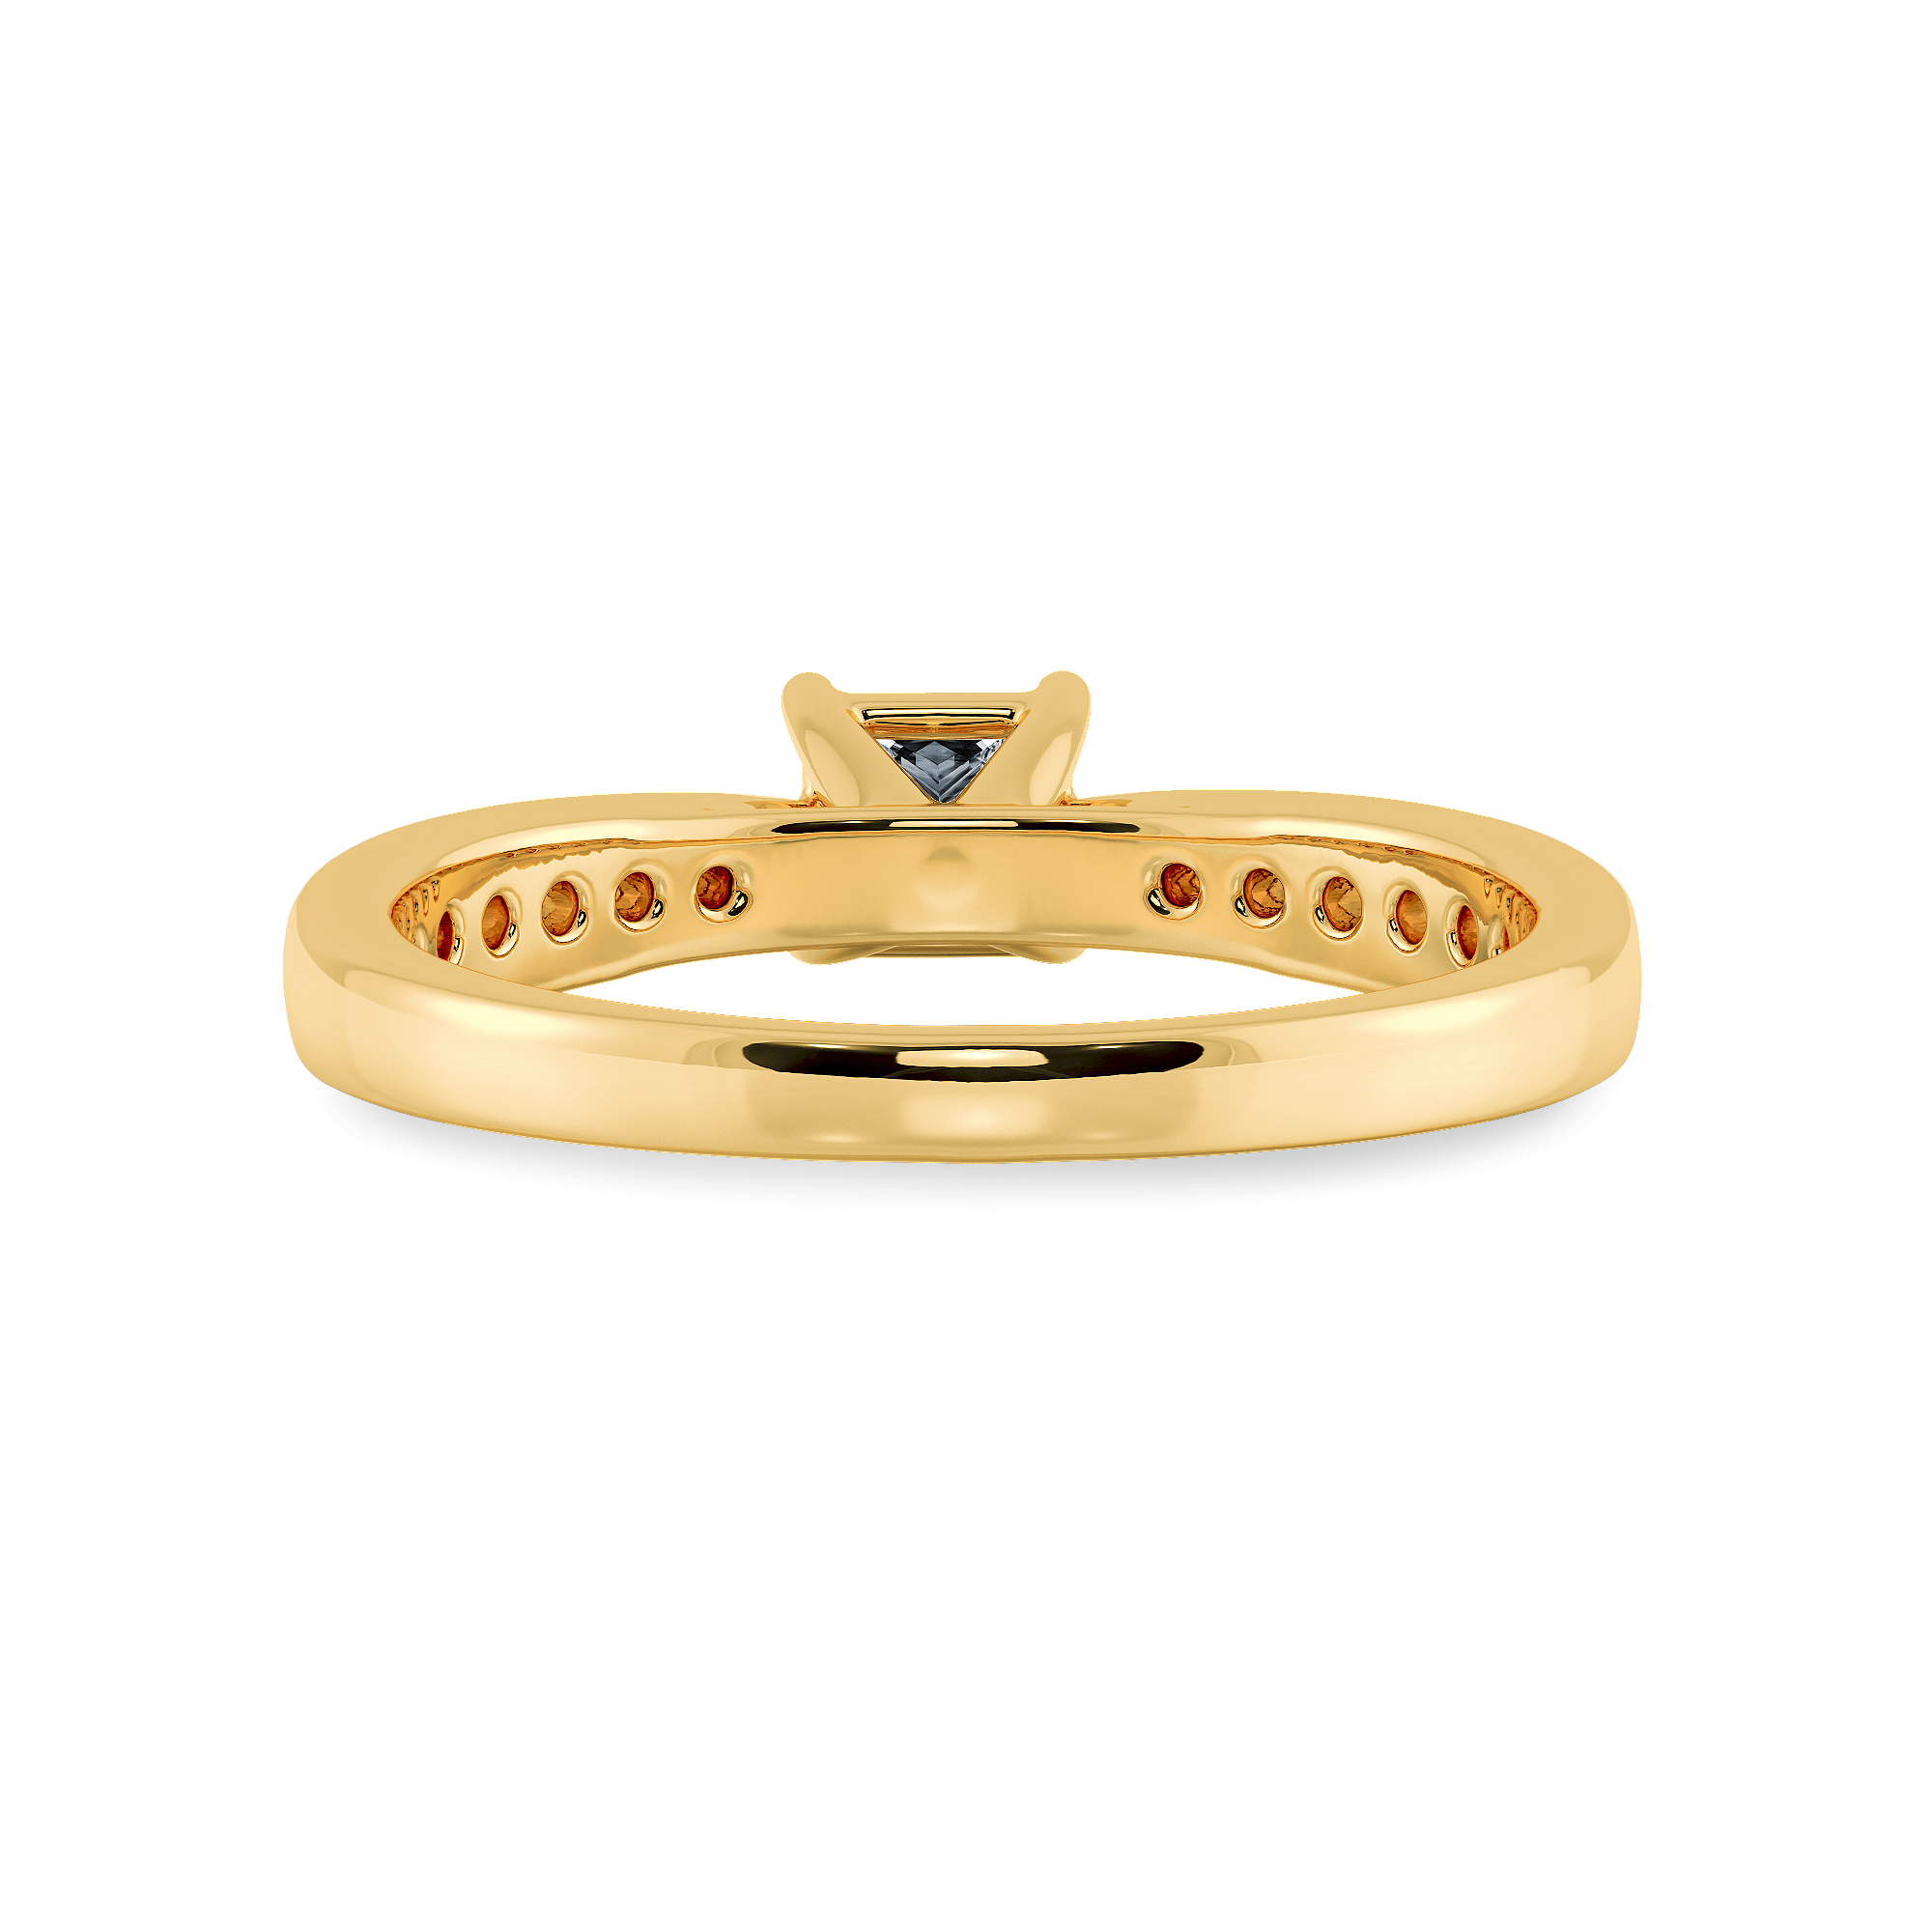 Band Of Dignity Men Gold Ring